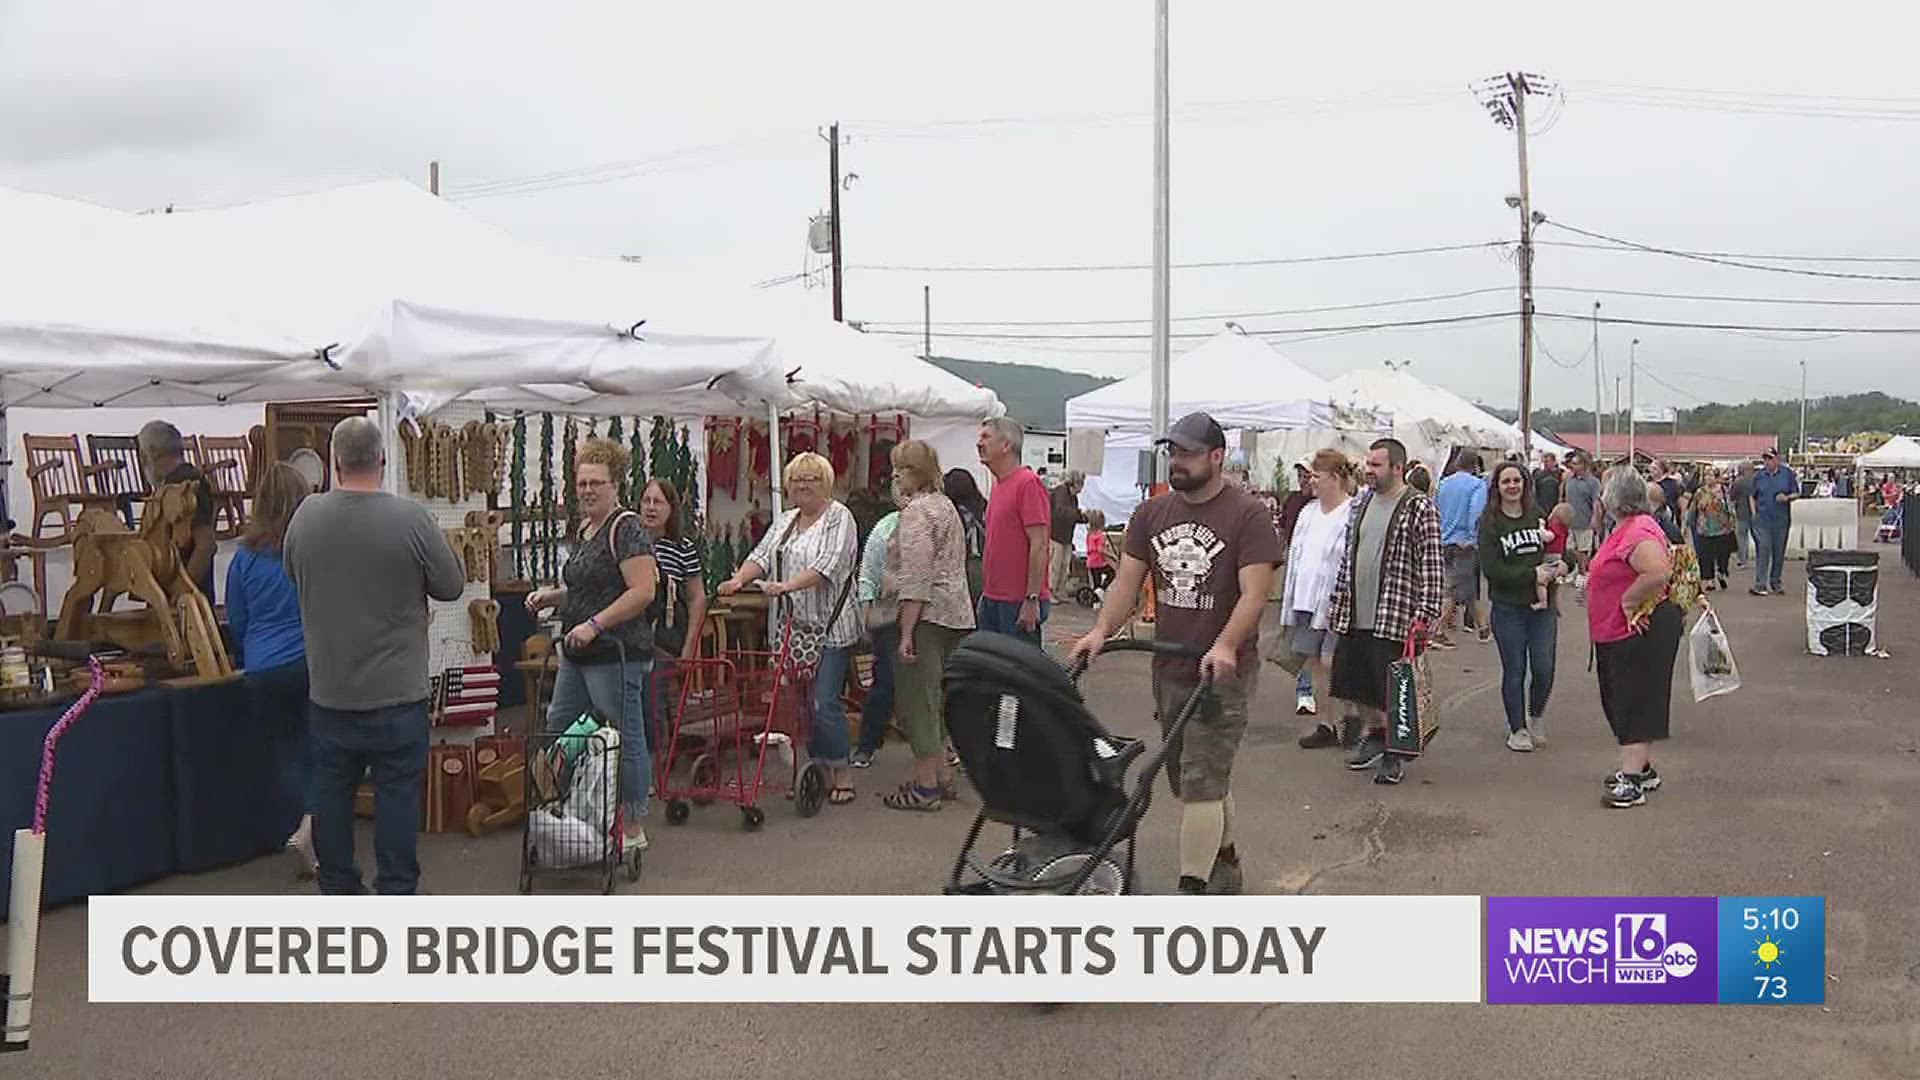 This is the 39th year for the Covered Bridge Festival and the first year it's being held at the Bloomsburg Fairgrounds.